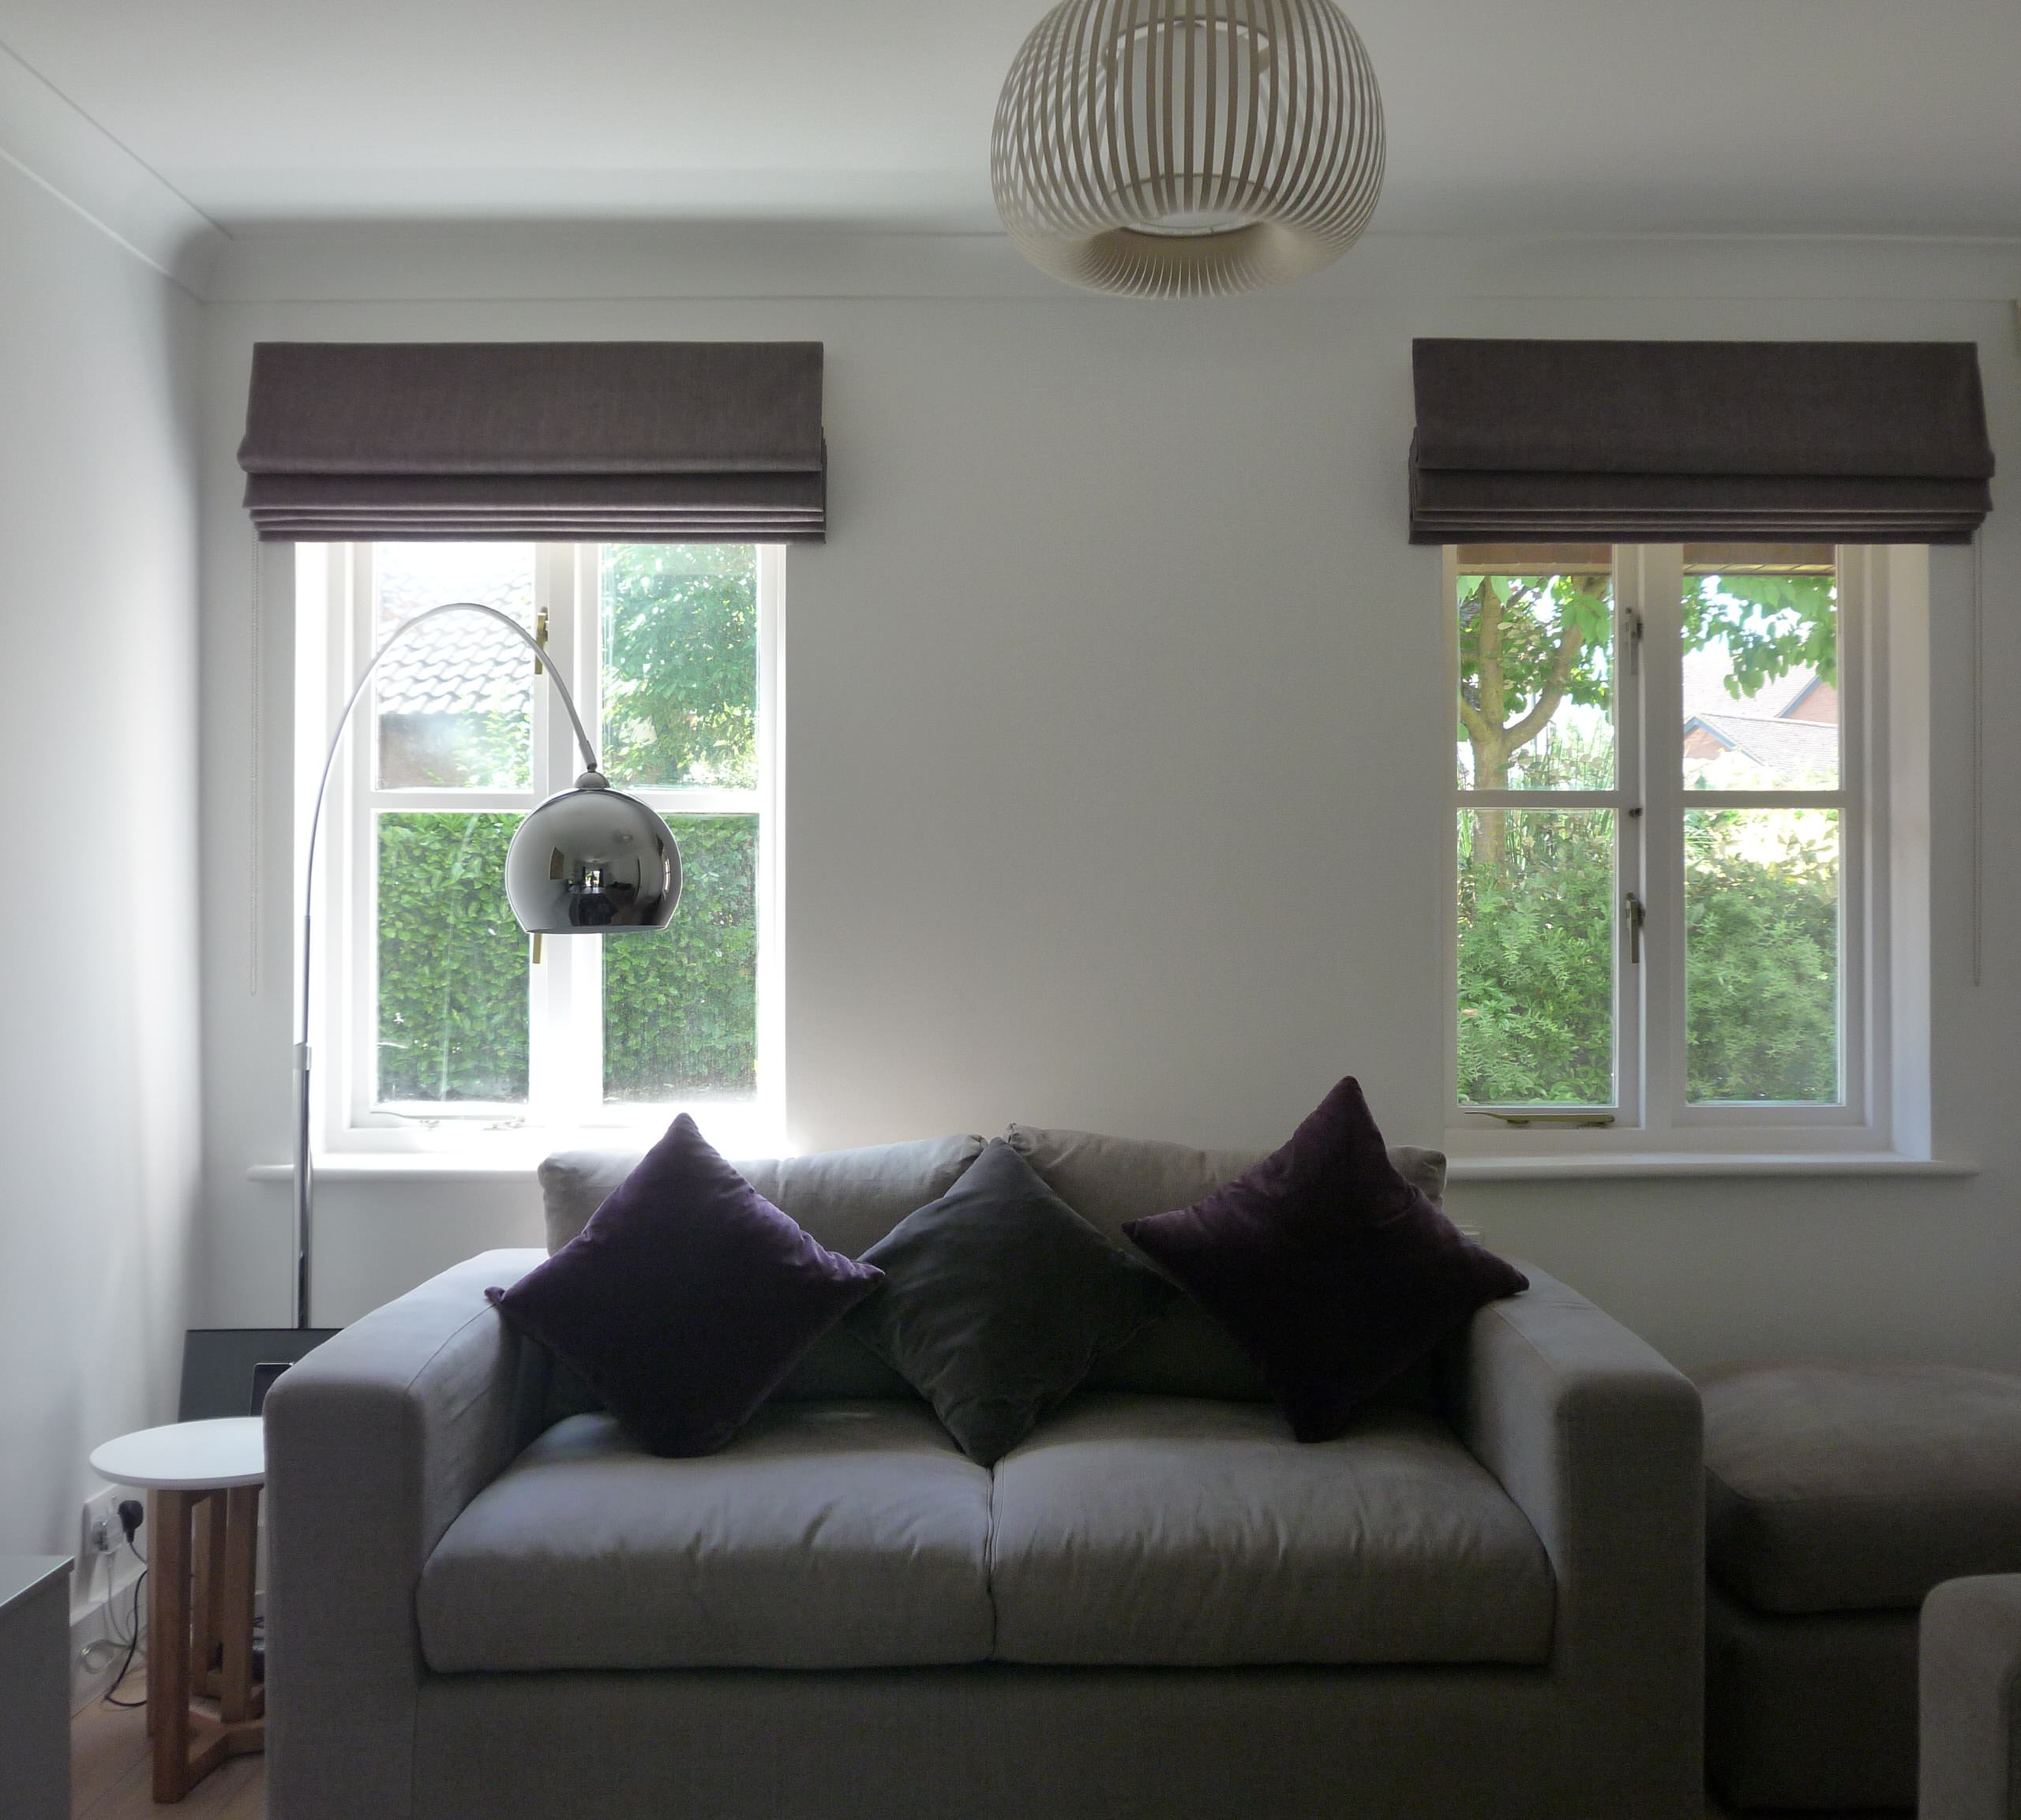 Sidcup: Contemporary Lounge